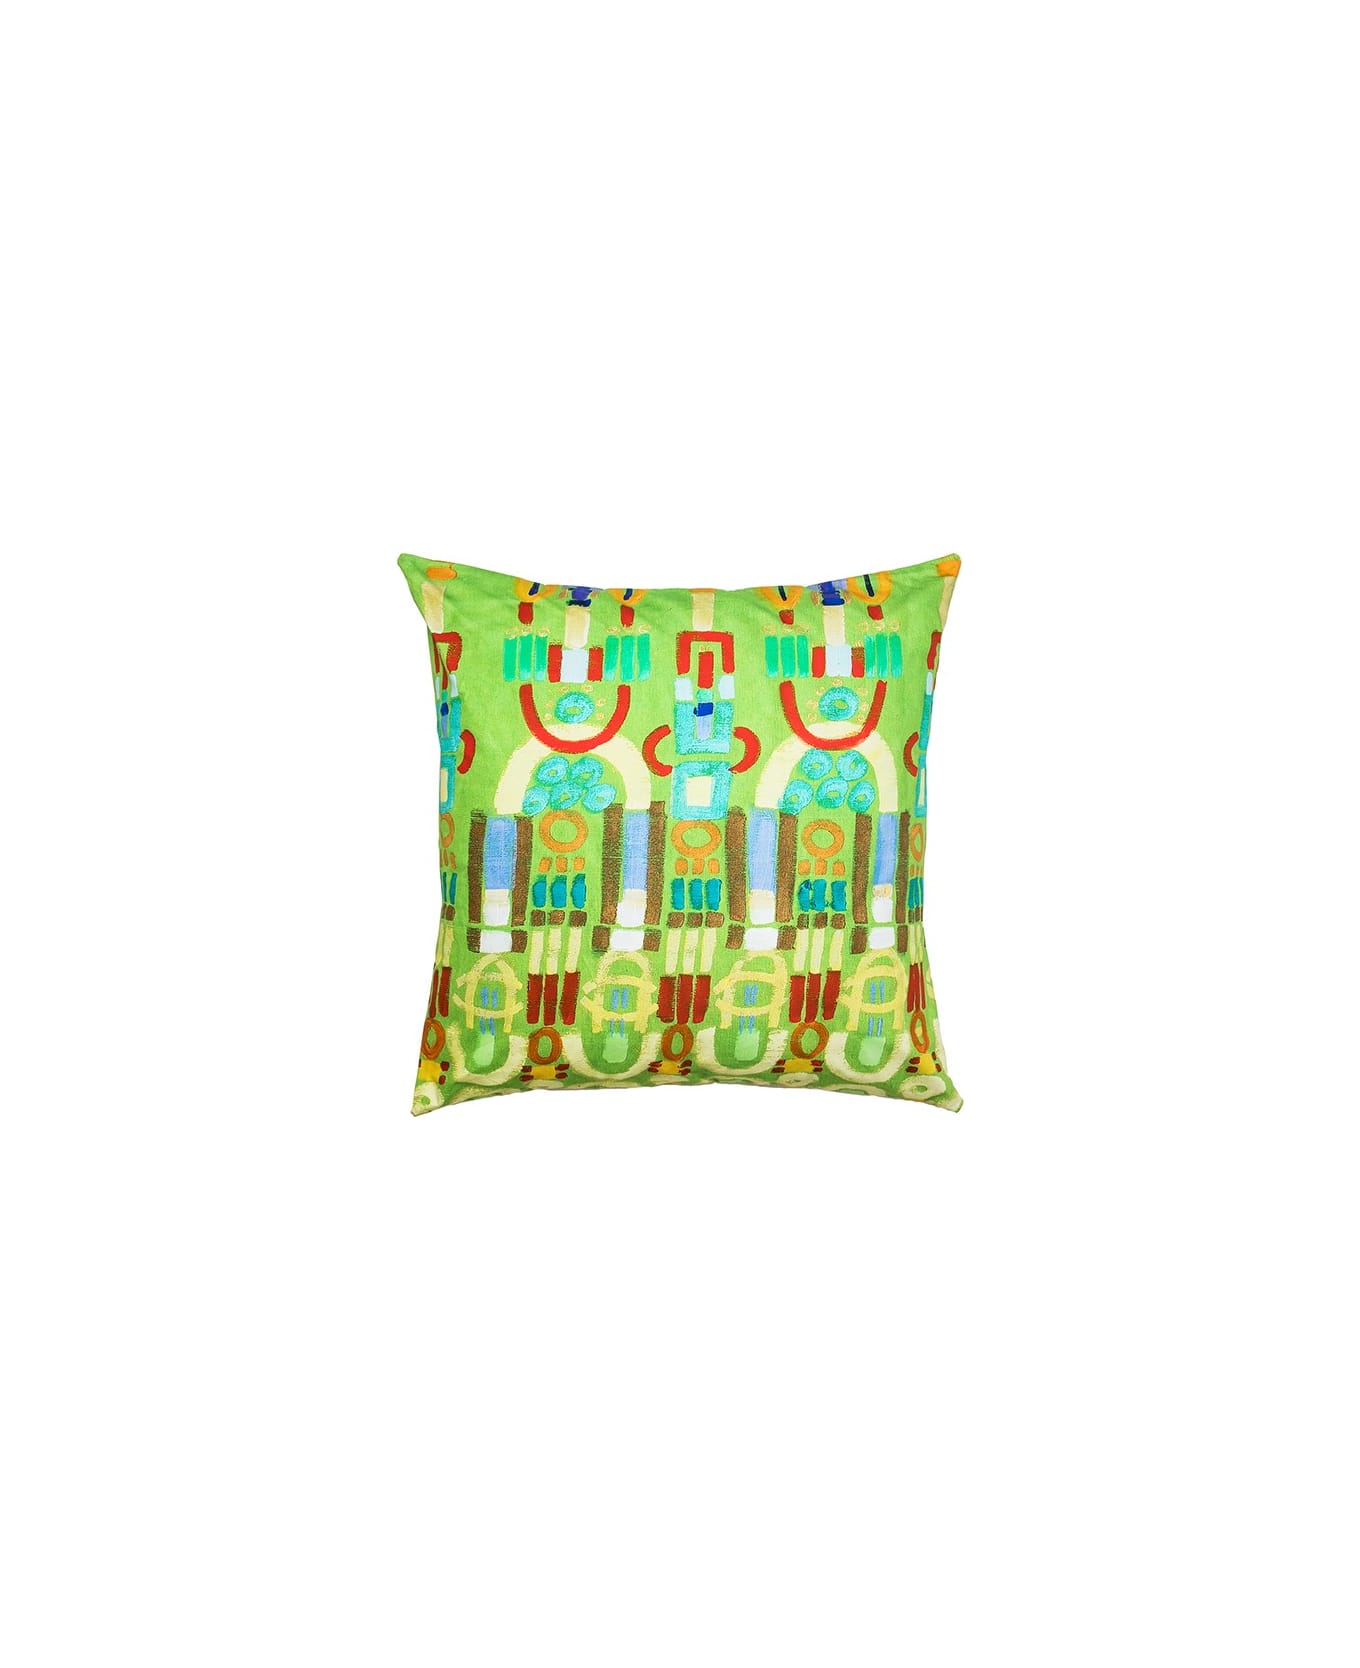 Le Botteghe su Gologone Printed Cushions 60x60 Cm - Lime Green クッション